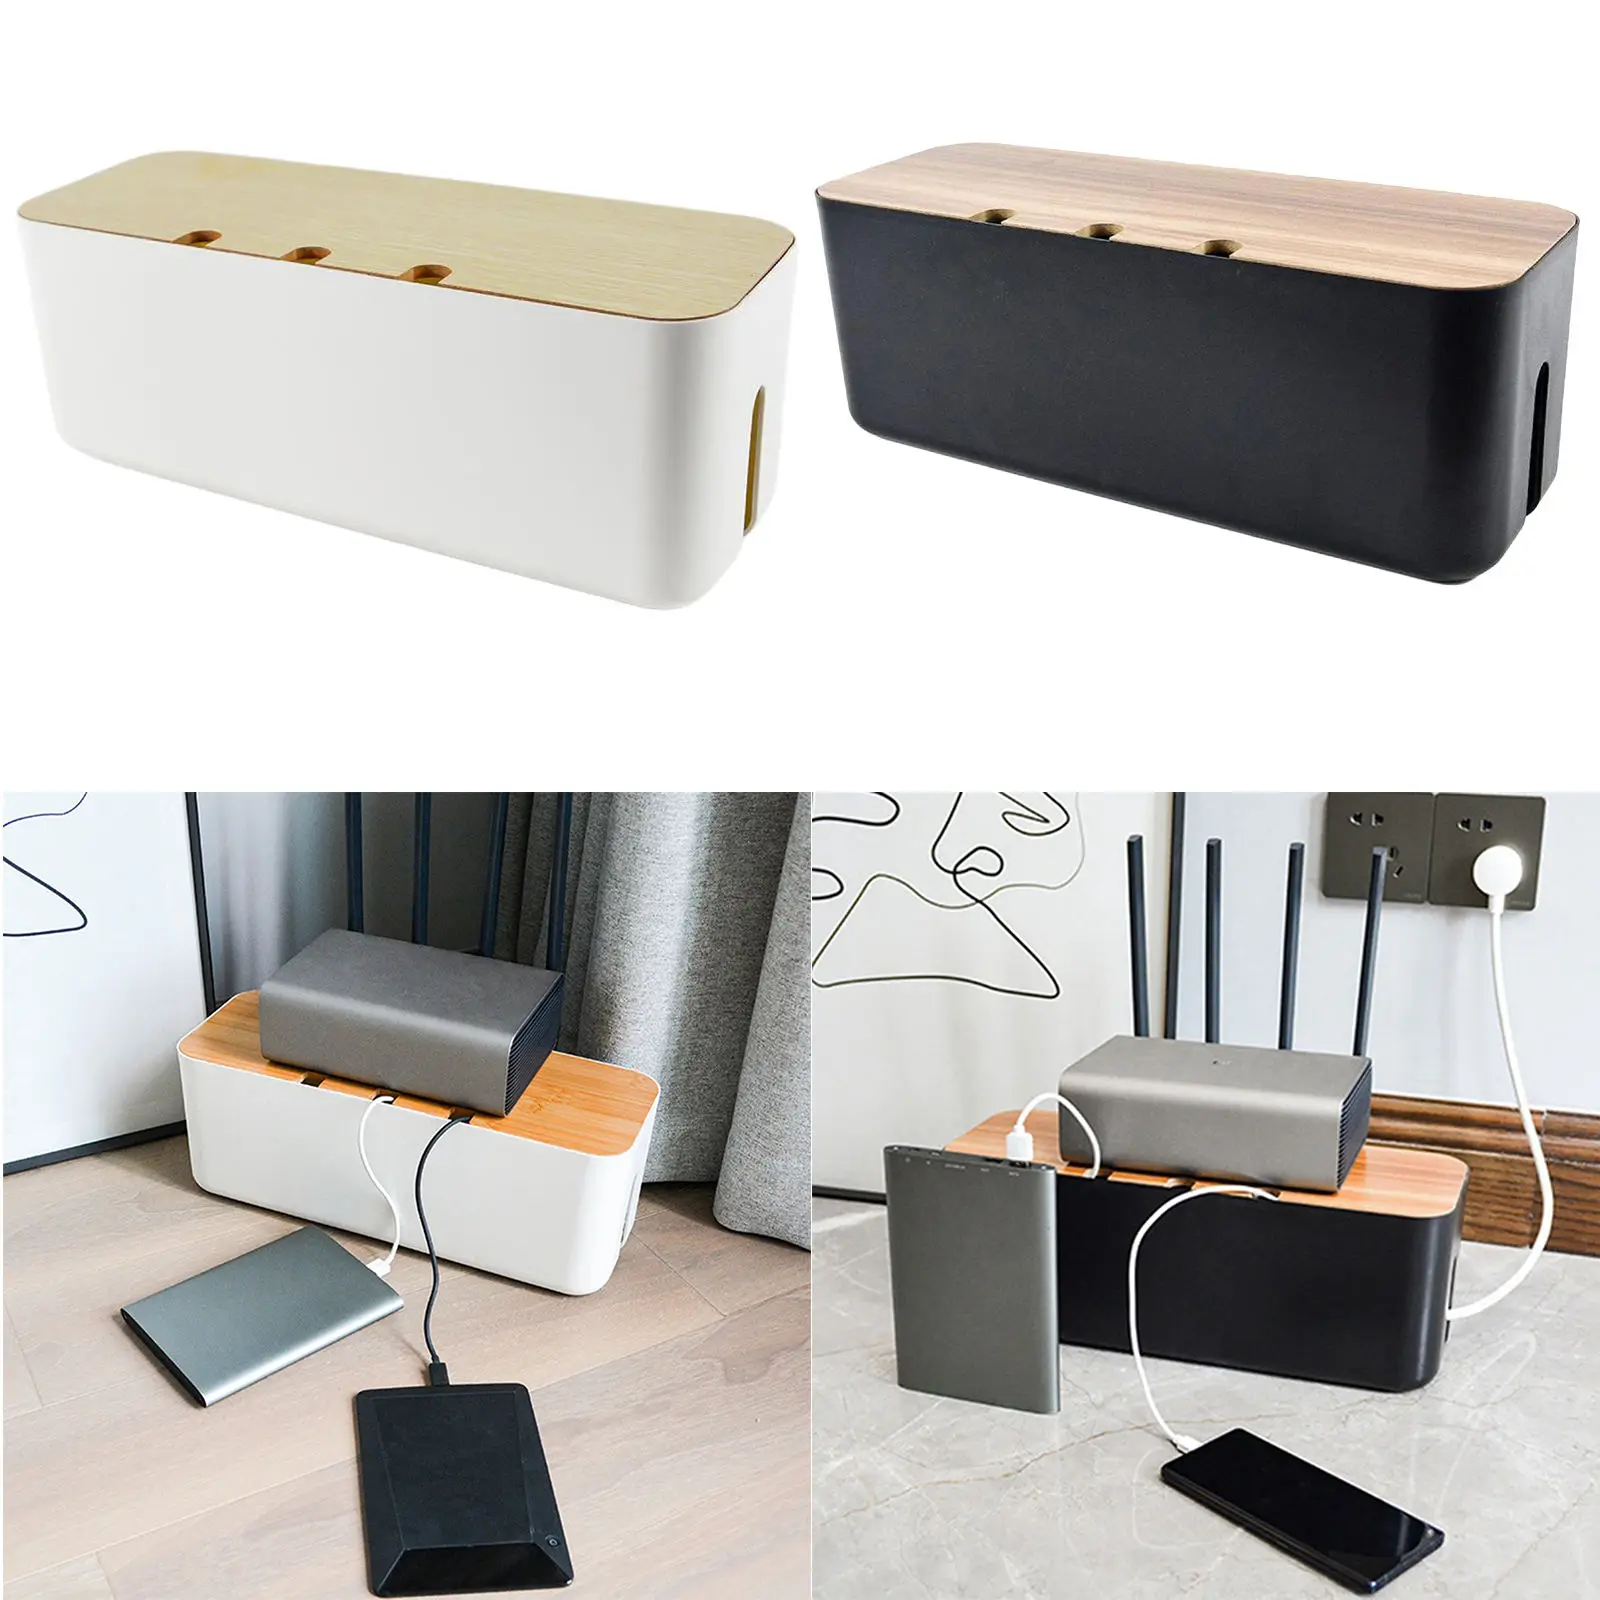 Cable Management Box ABS Wood Lid Wire Cable Organizer Box Power Stripe Surge Protector Covering Hiding for Desktop Home Office